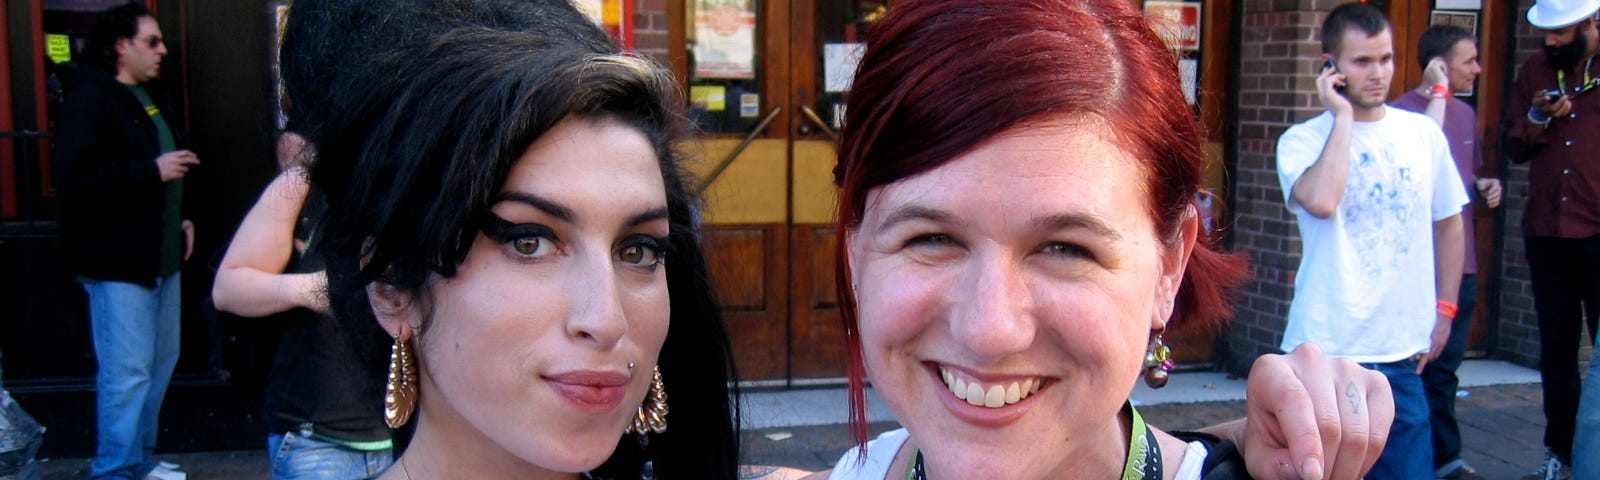 The author poses at SXSW 2007 with Amy Winehouse